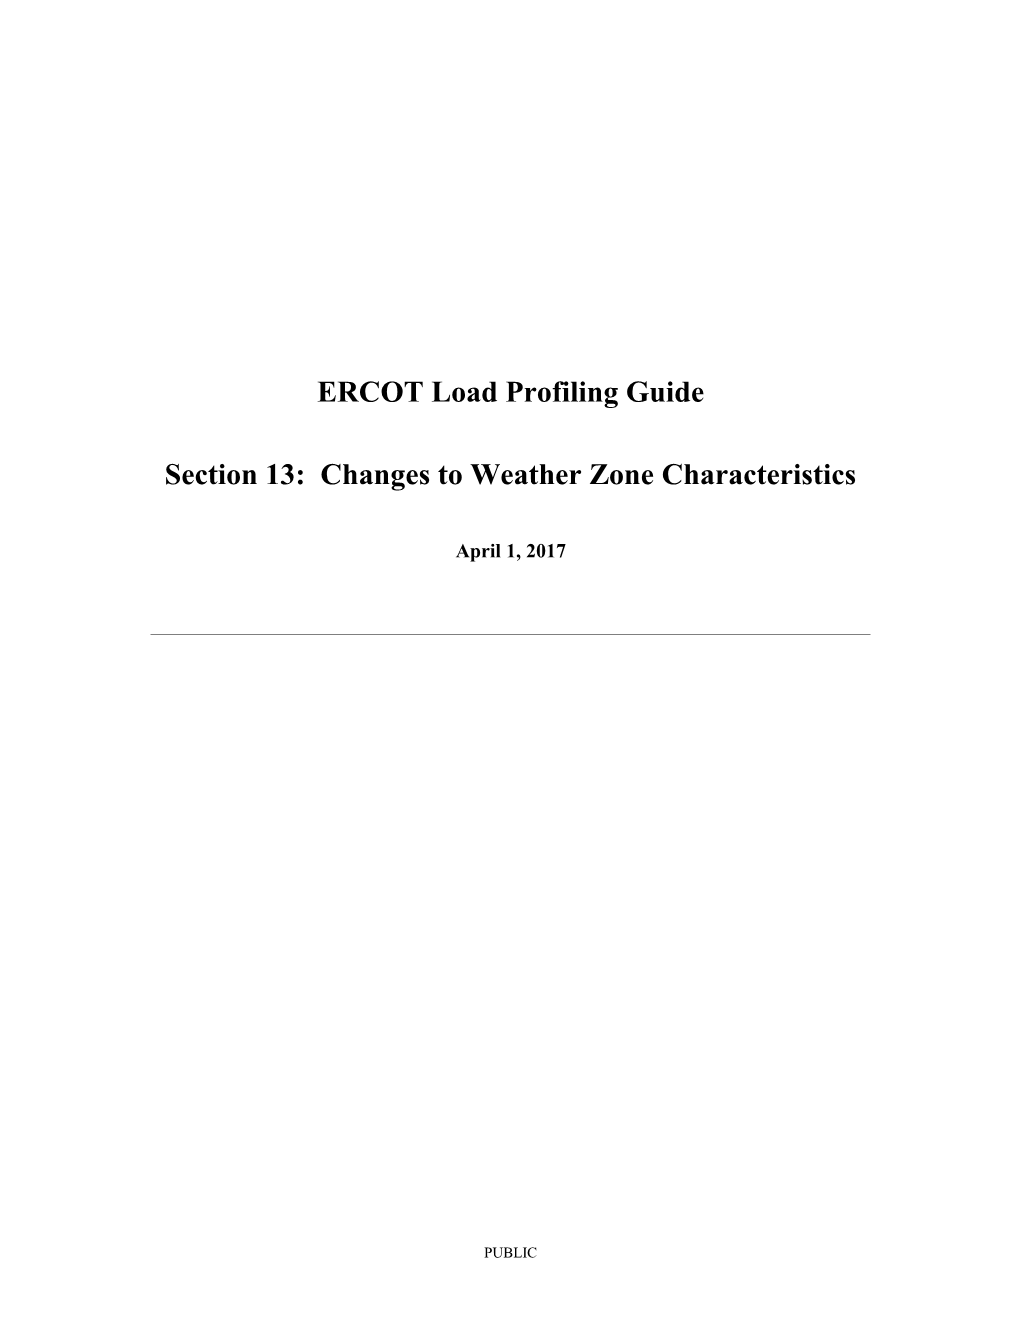 ERCOT Load Profiling Guide s1